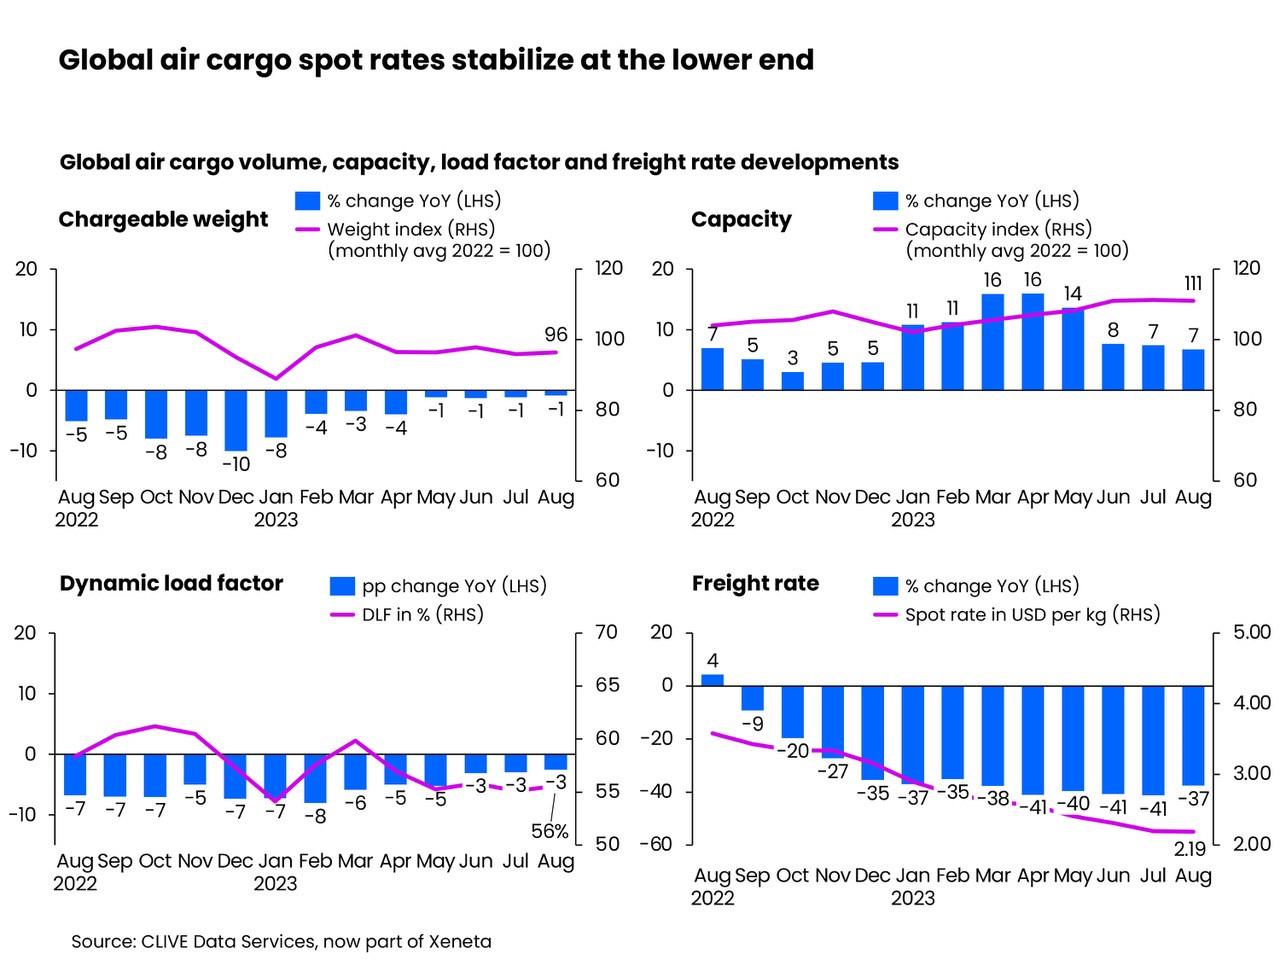 Self Photos / Files - Global air cargo spot rates stabilize at the lower end